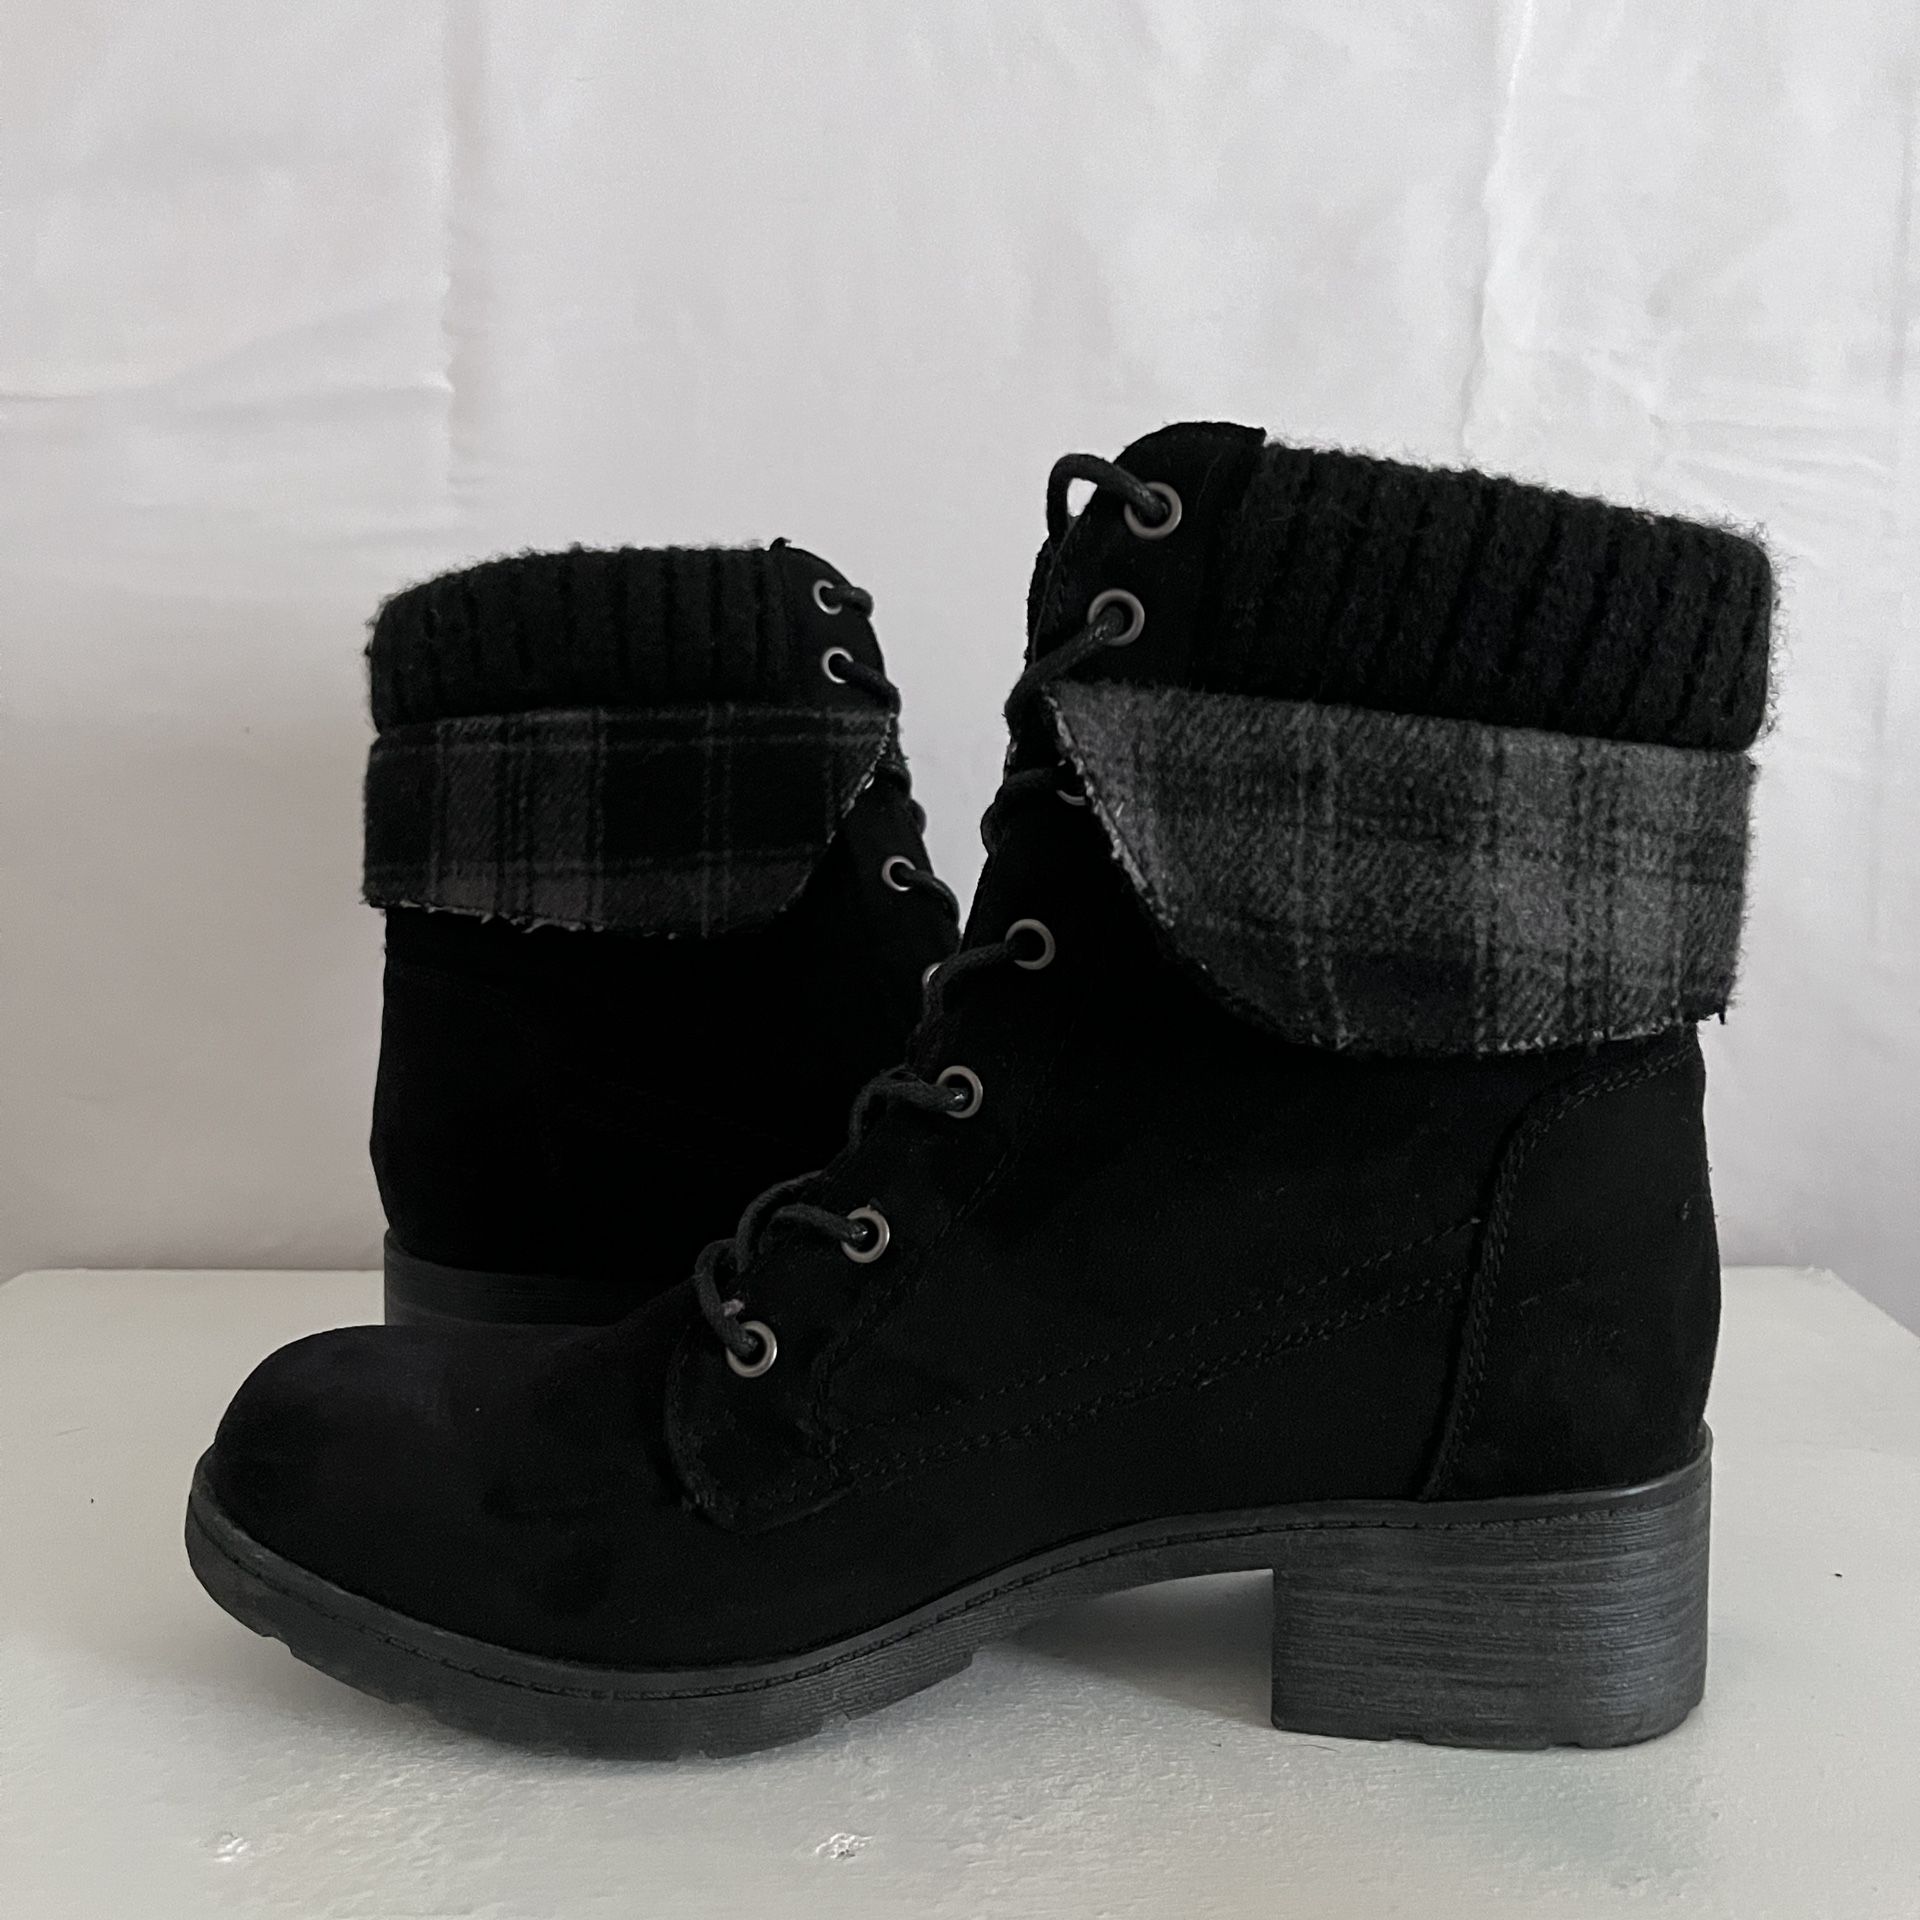 Black Brash Small Heel Lace Up Boots Women Size 9